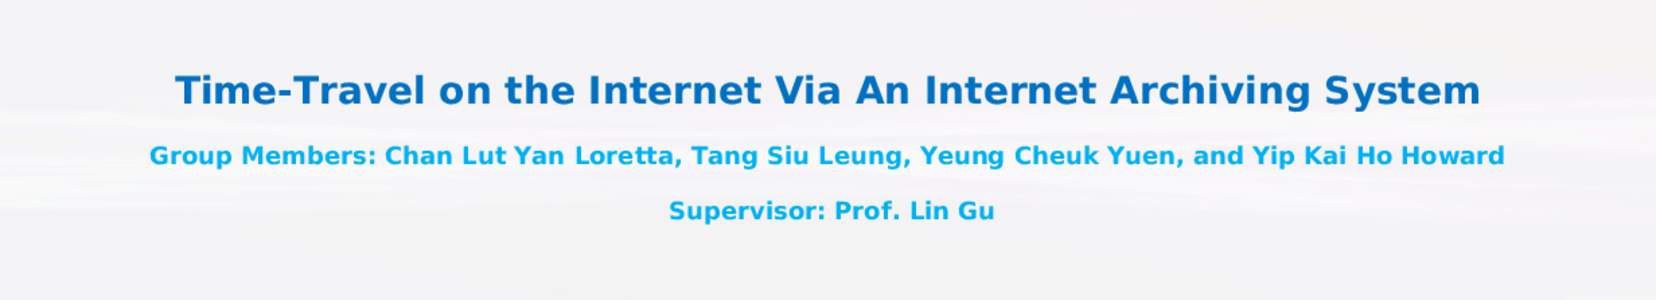 Time-Travel on the Internet Via An Internet Archiving System Group Members: Chan Lut Yan Loretta, Tang Siu Leung, Yeung Cheuk Yuen, and Yip Kai Ho Howard Supervisor: Prof. Lin Gu INTRODUCTION Internet browsing enables p